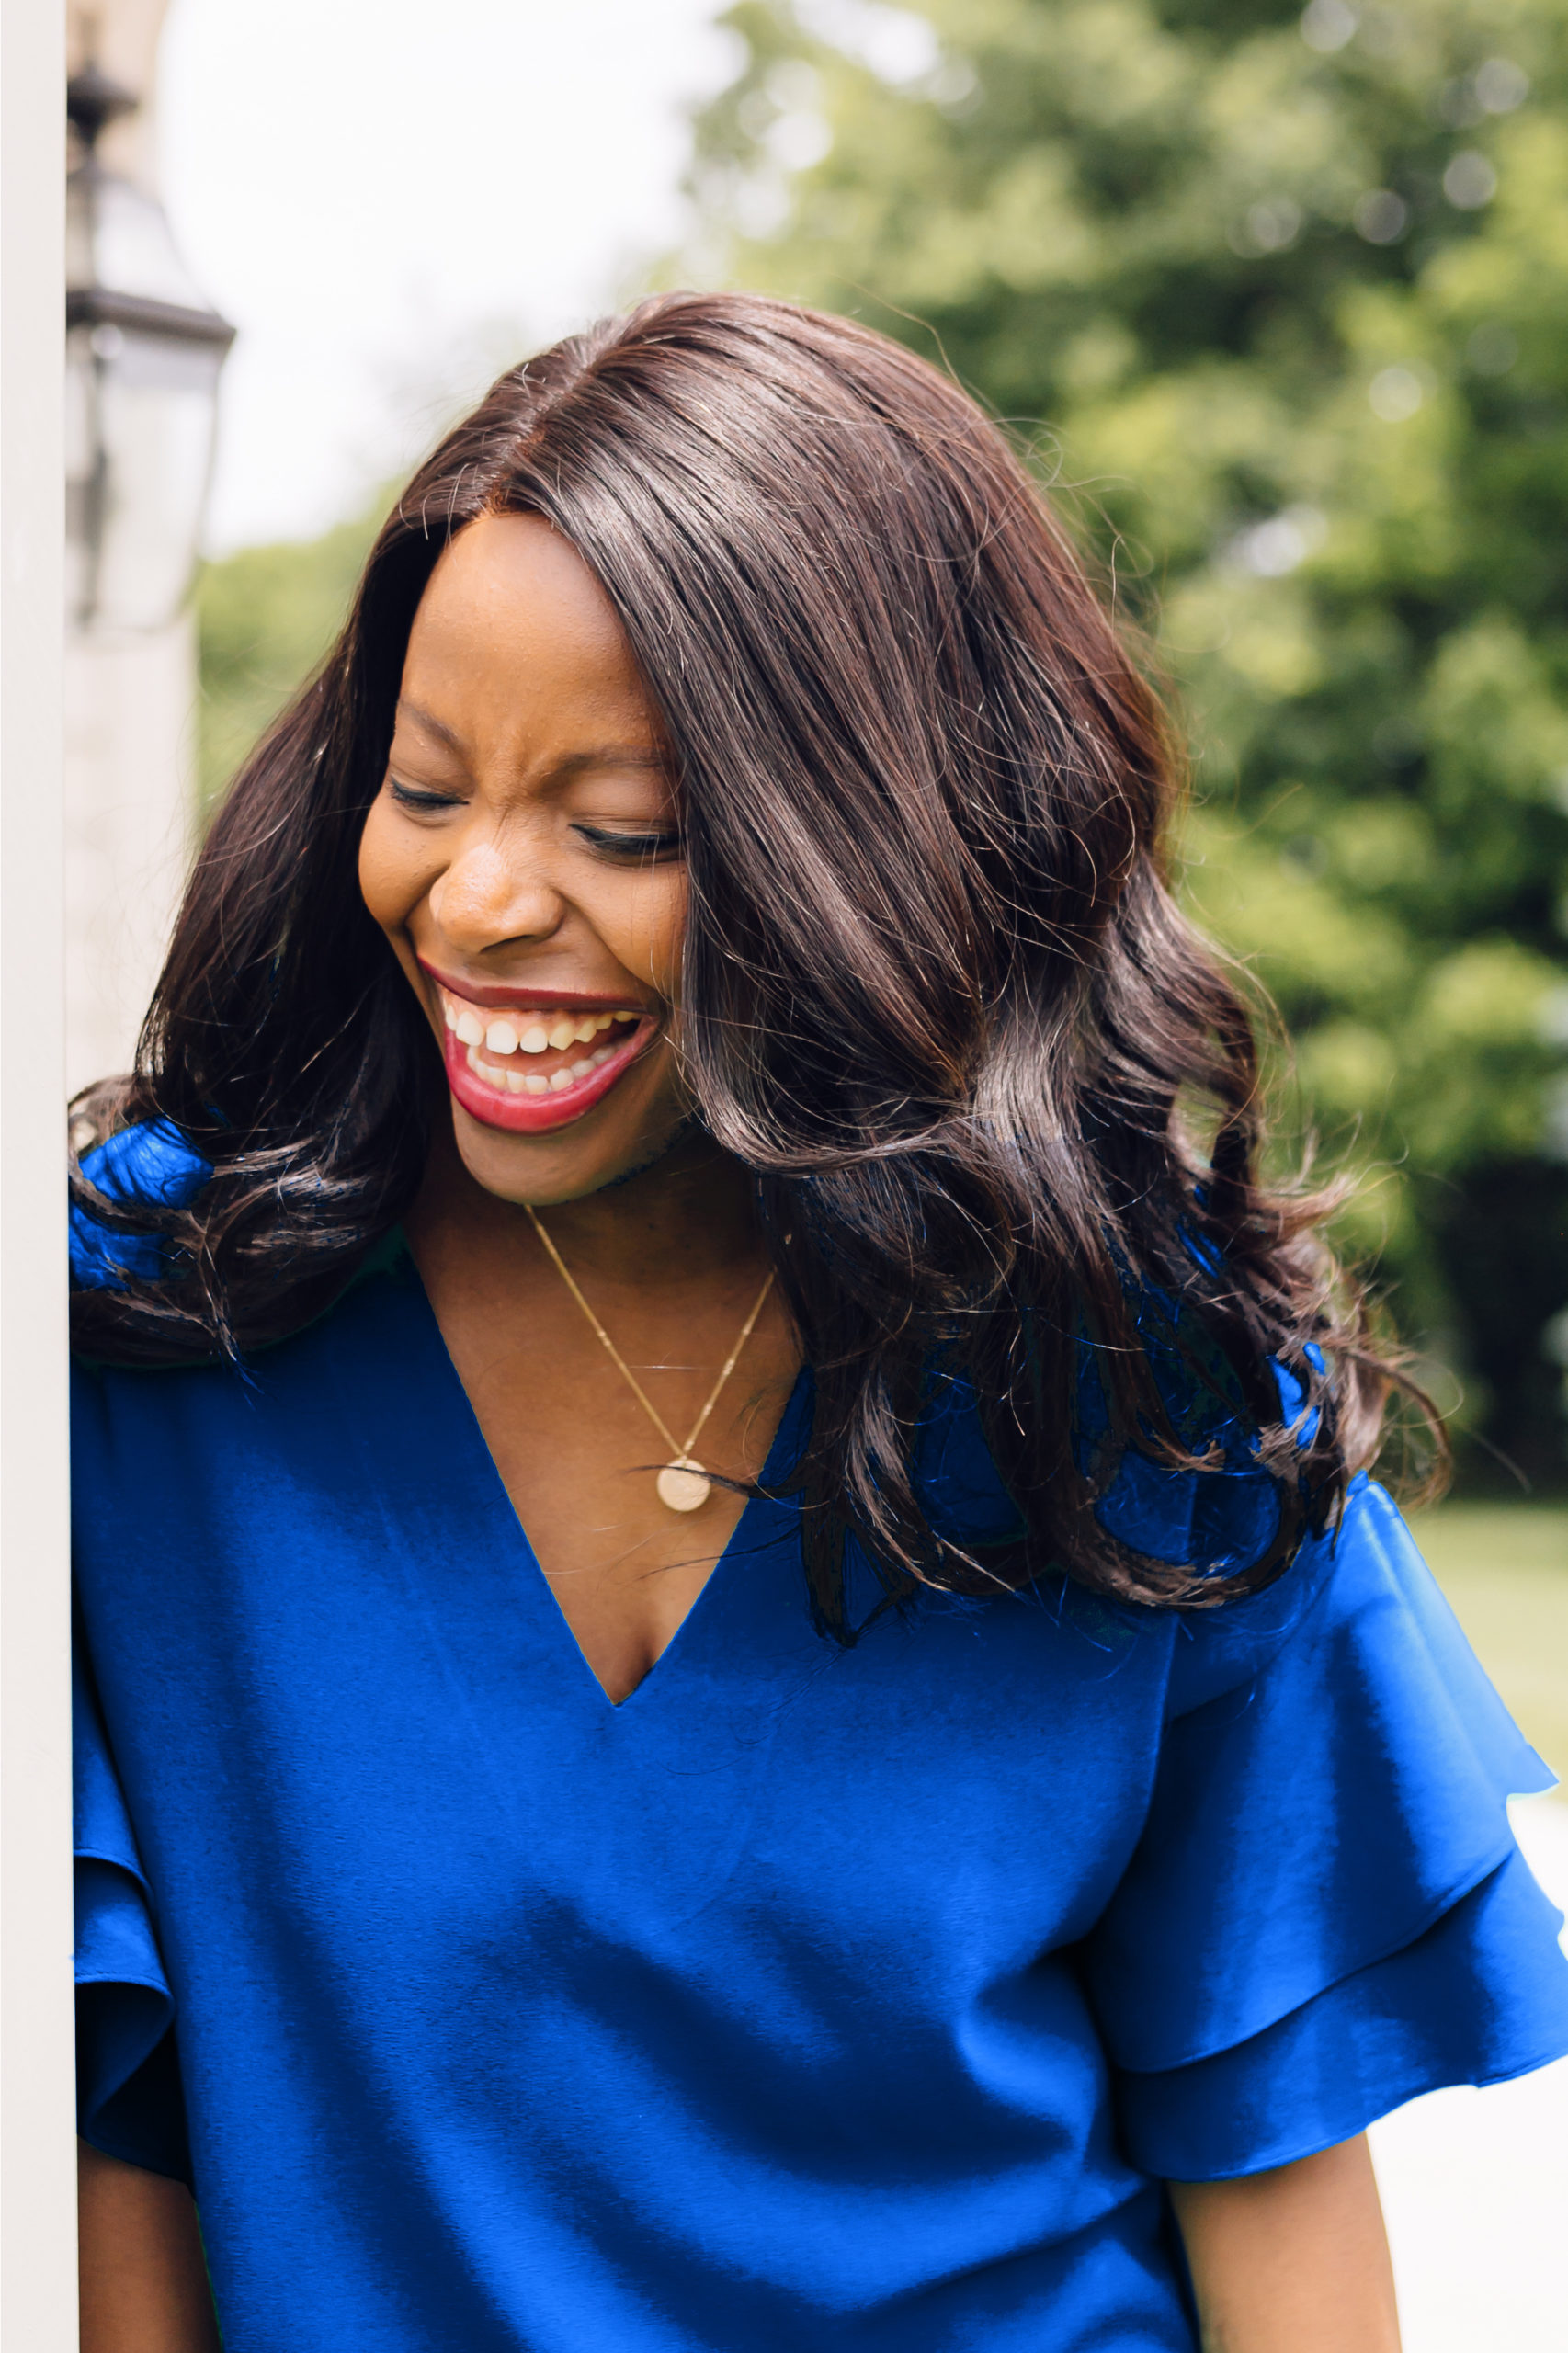 All Your Contract Questions Answered: How To Be Legally Set With Kunbi Odubogun, an Attorney and Publisher with 10 years’ experience in the luxury events industry, to ask her ALLLLL the legal questions you’ve been trying to get answers to.